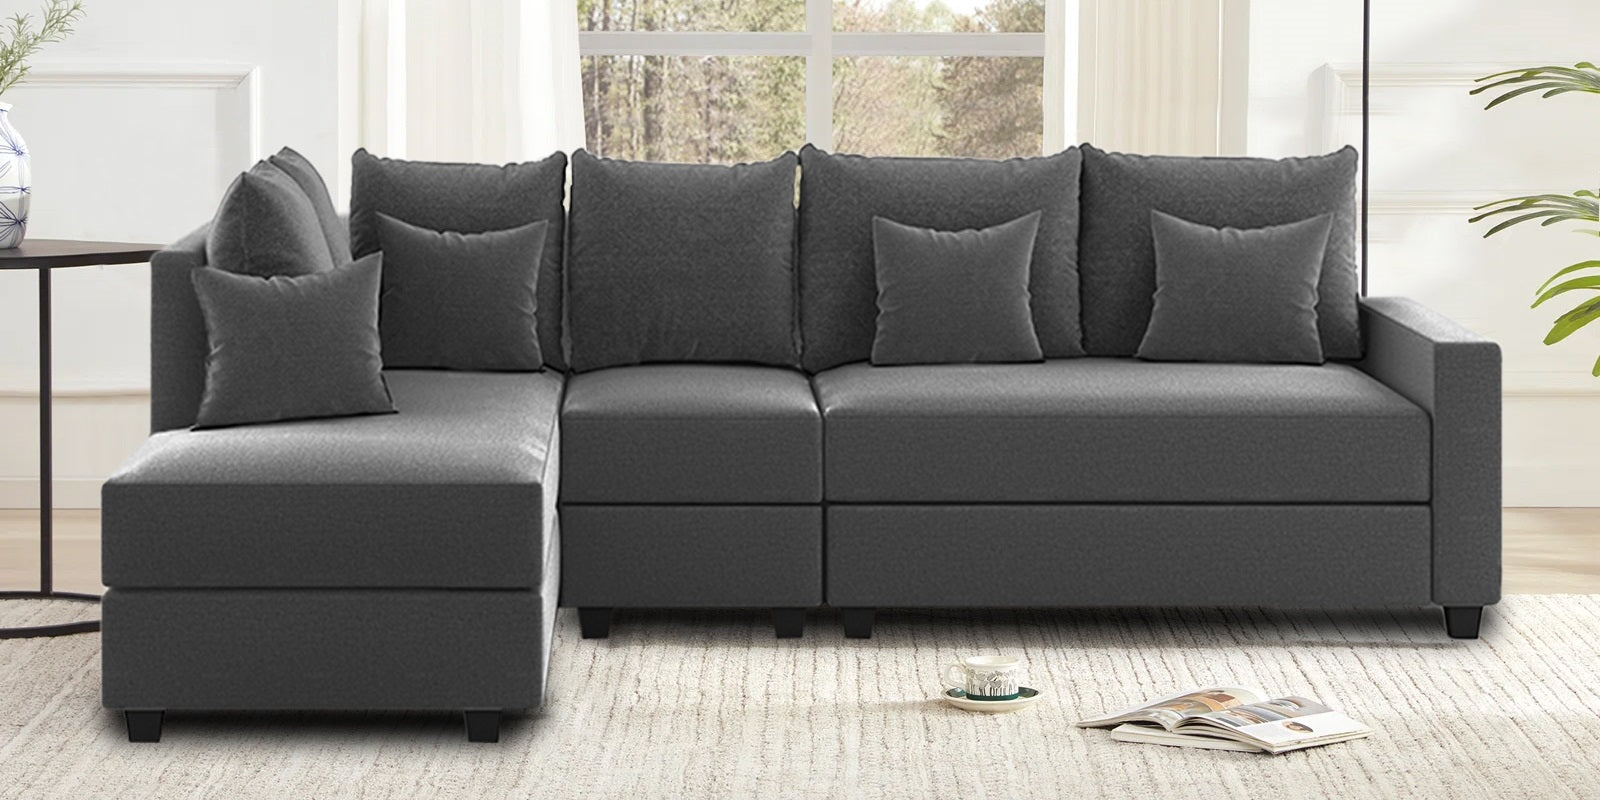 Ginny Fabric RHS Sectional Sofa (3+Lounger) Charcoal Grey Colour